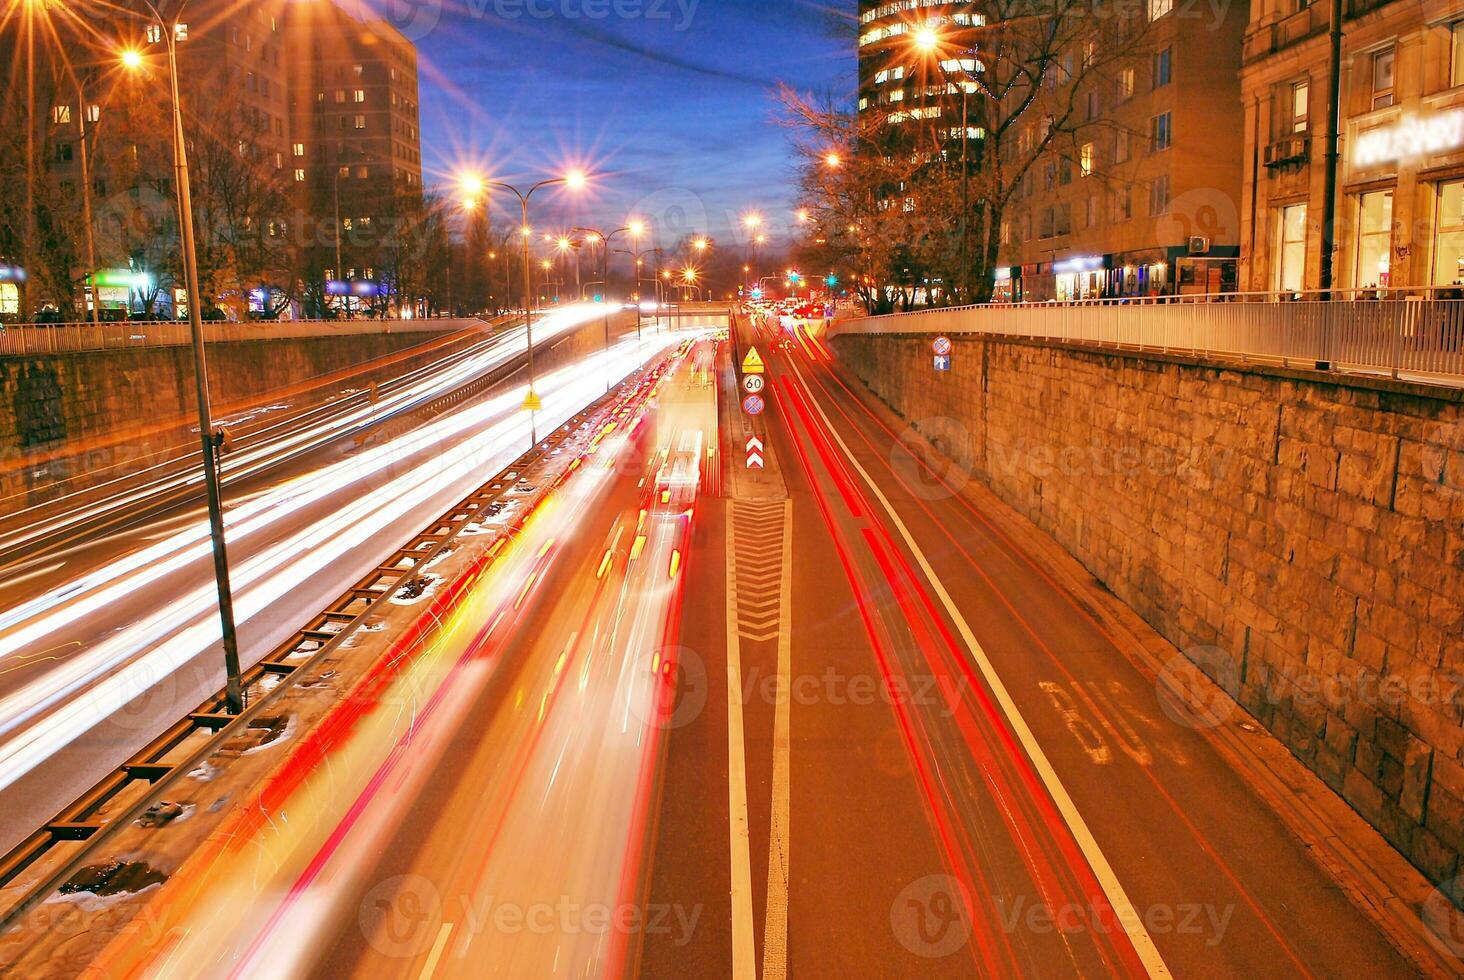 Light streaks and traces of movement in the city photo